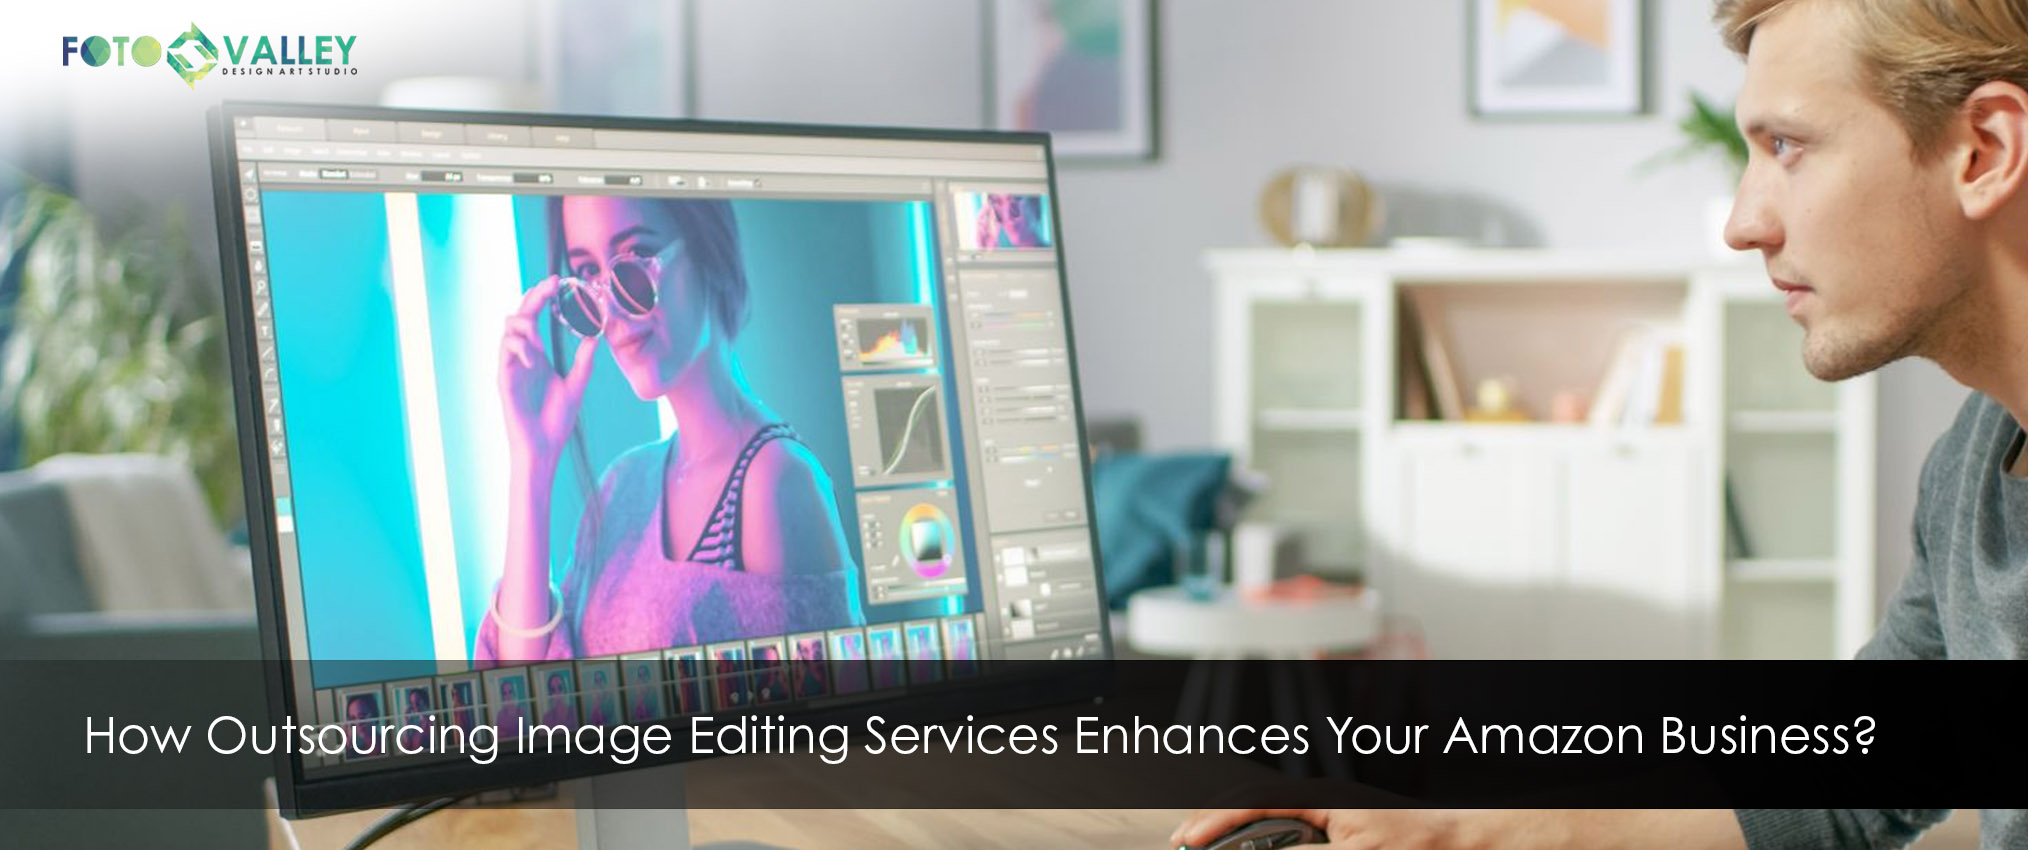 HOW OUTSOURCING IMAGE EDITING SERVICES ENHANCES YOUR AMAZON BUSINESS?